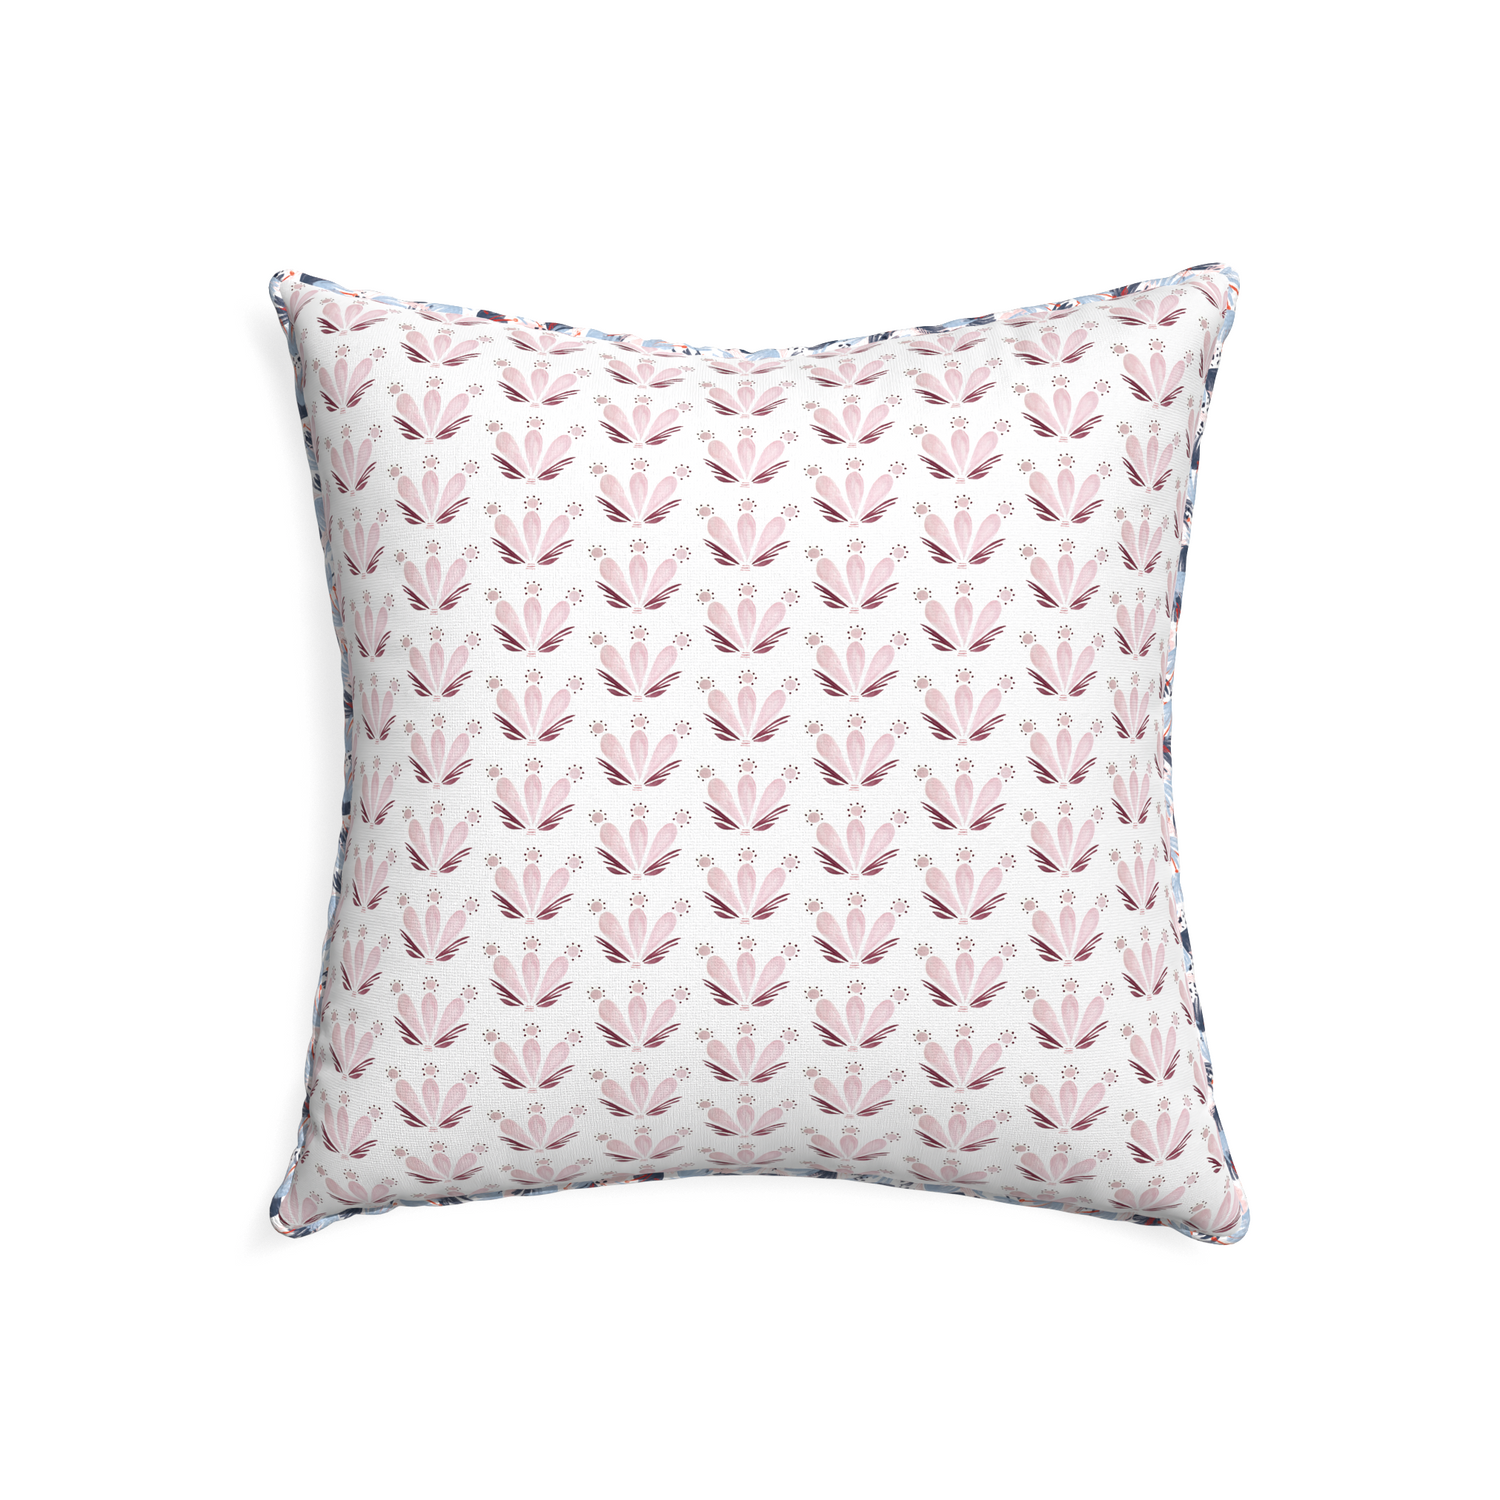 22-square serena pink custom pillow with e piping on white background